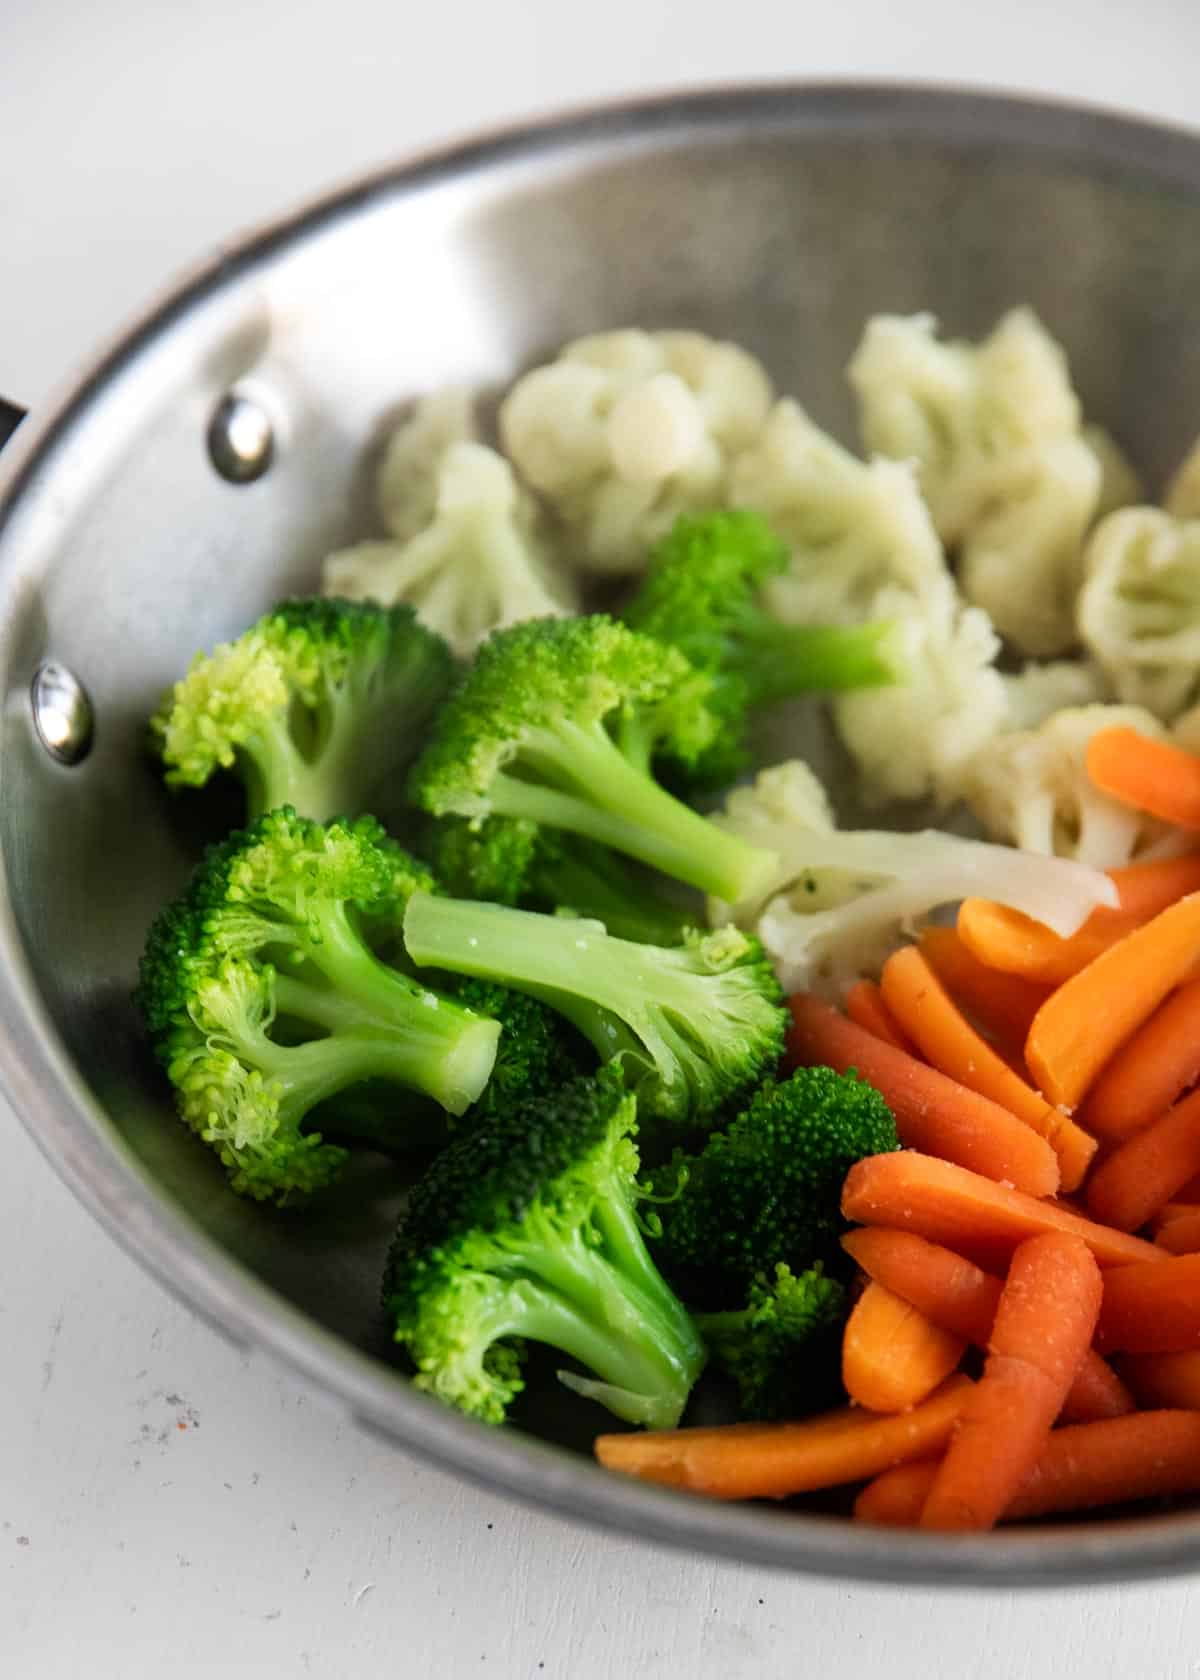 Steamed vegetables cooked in pan.